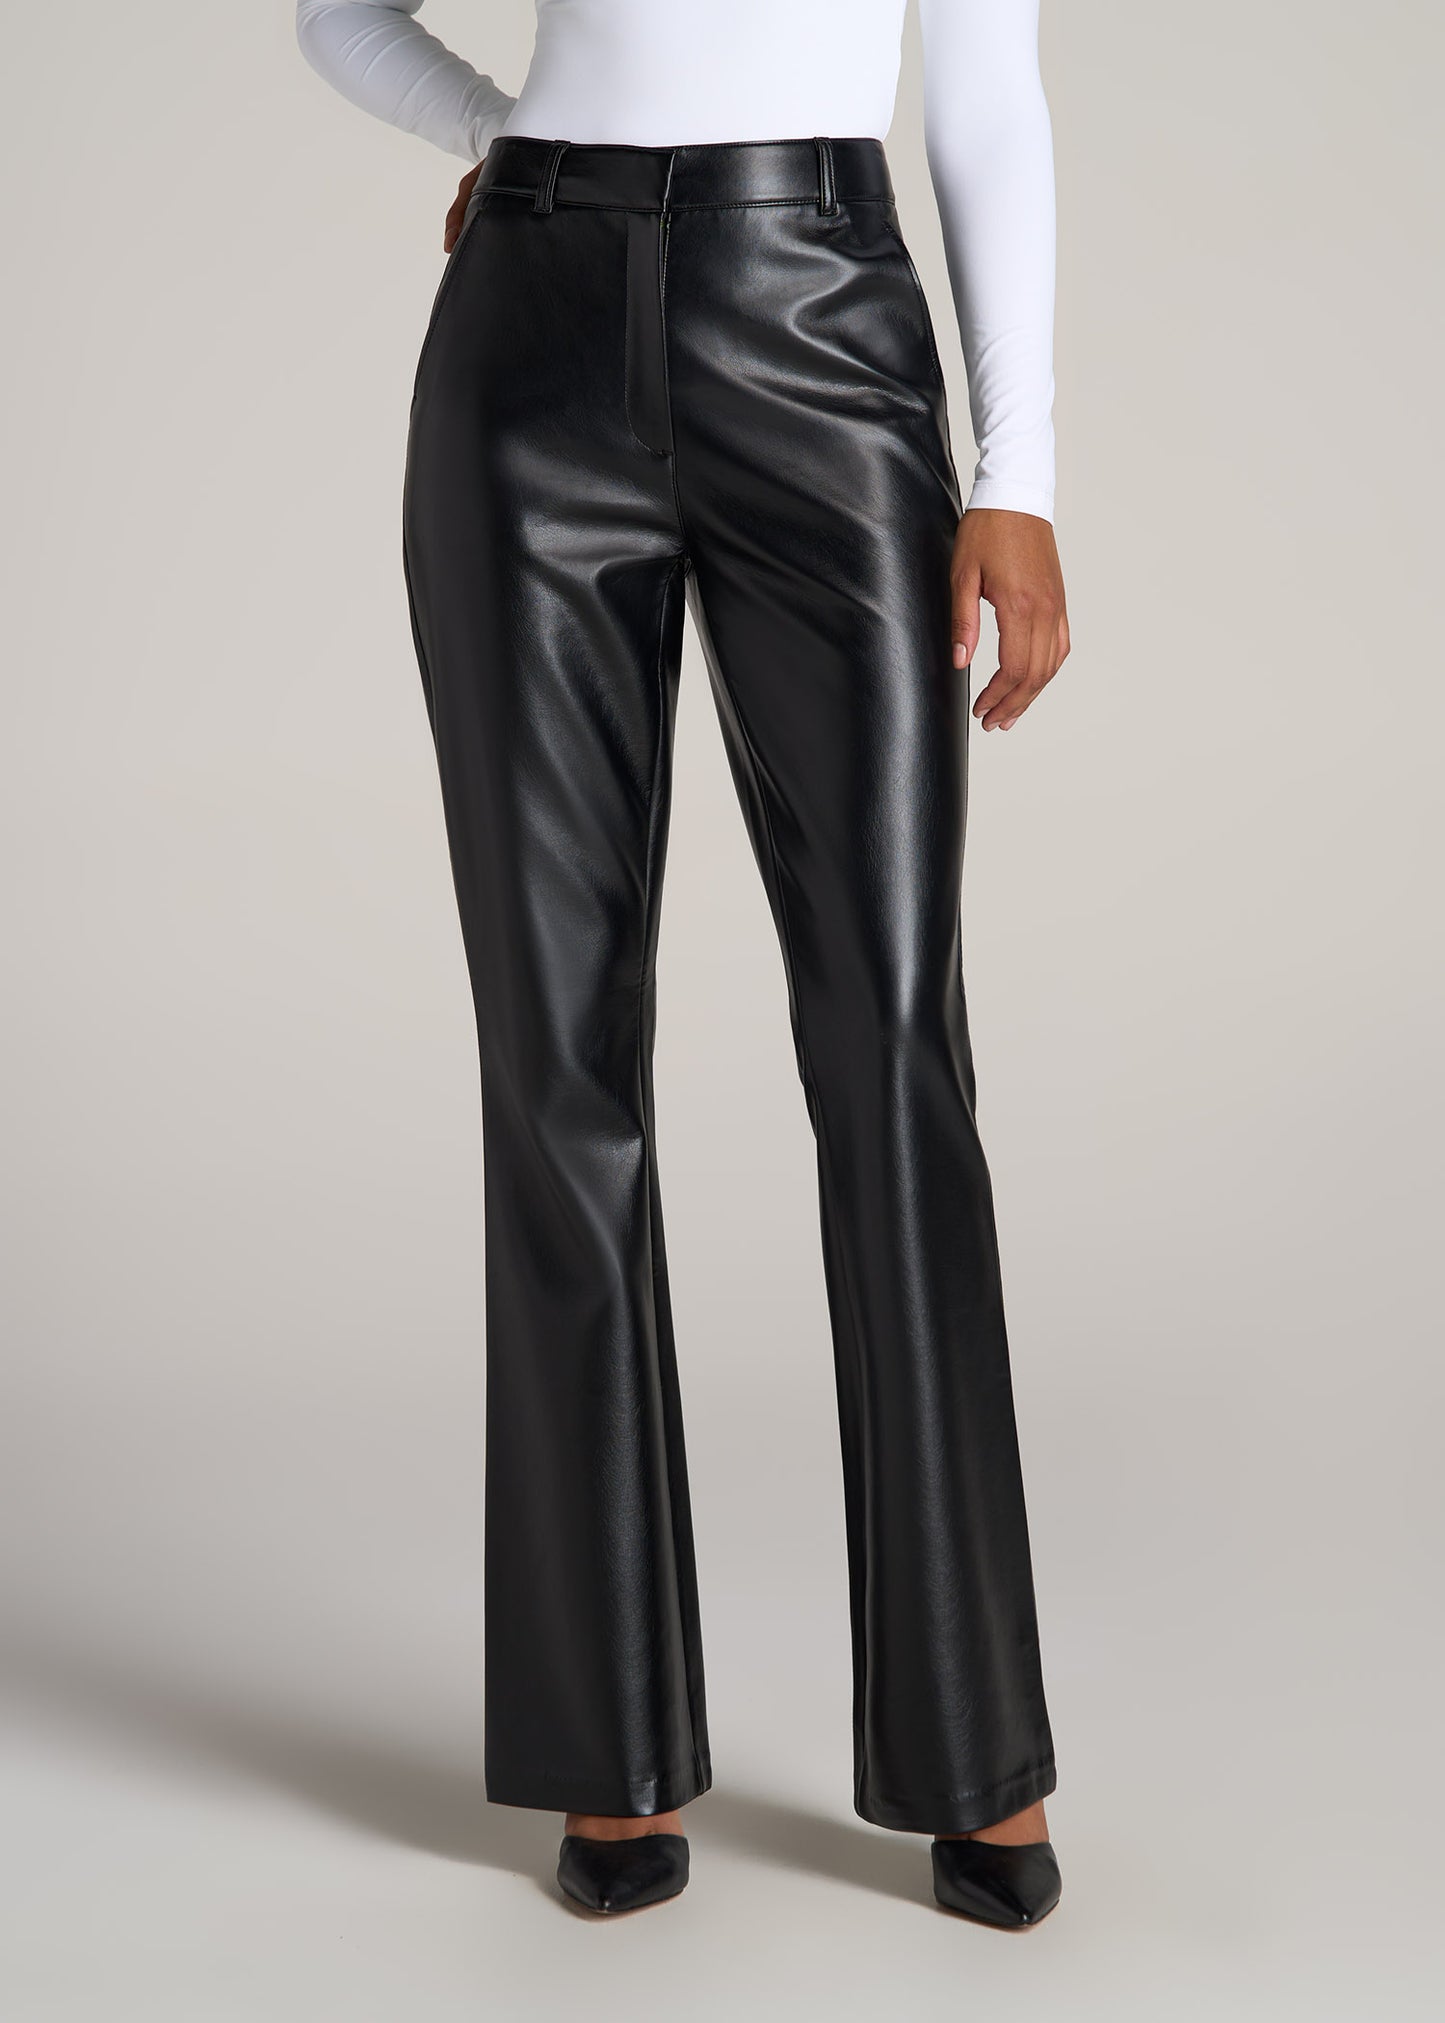 A tall woman wearing American Tall's Faux Leather Pants in the color black.